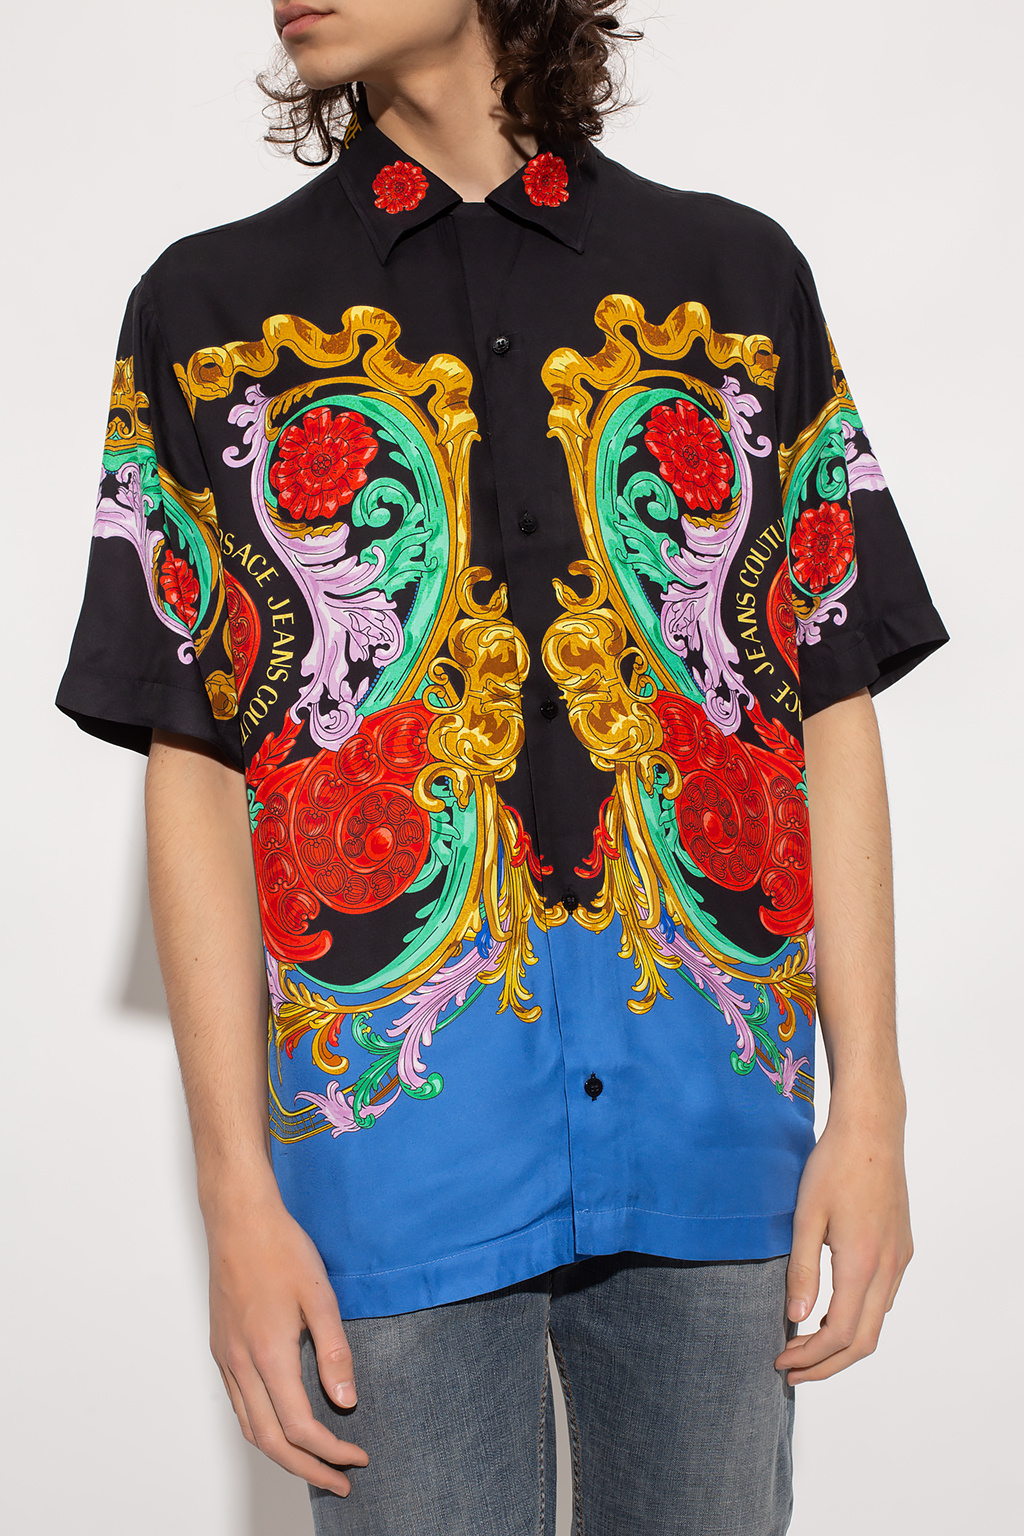 Versace Jeans Couture shirt Logo with ‘Sun Flower Garland’ pattern